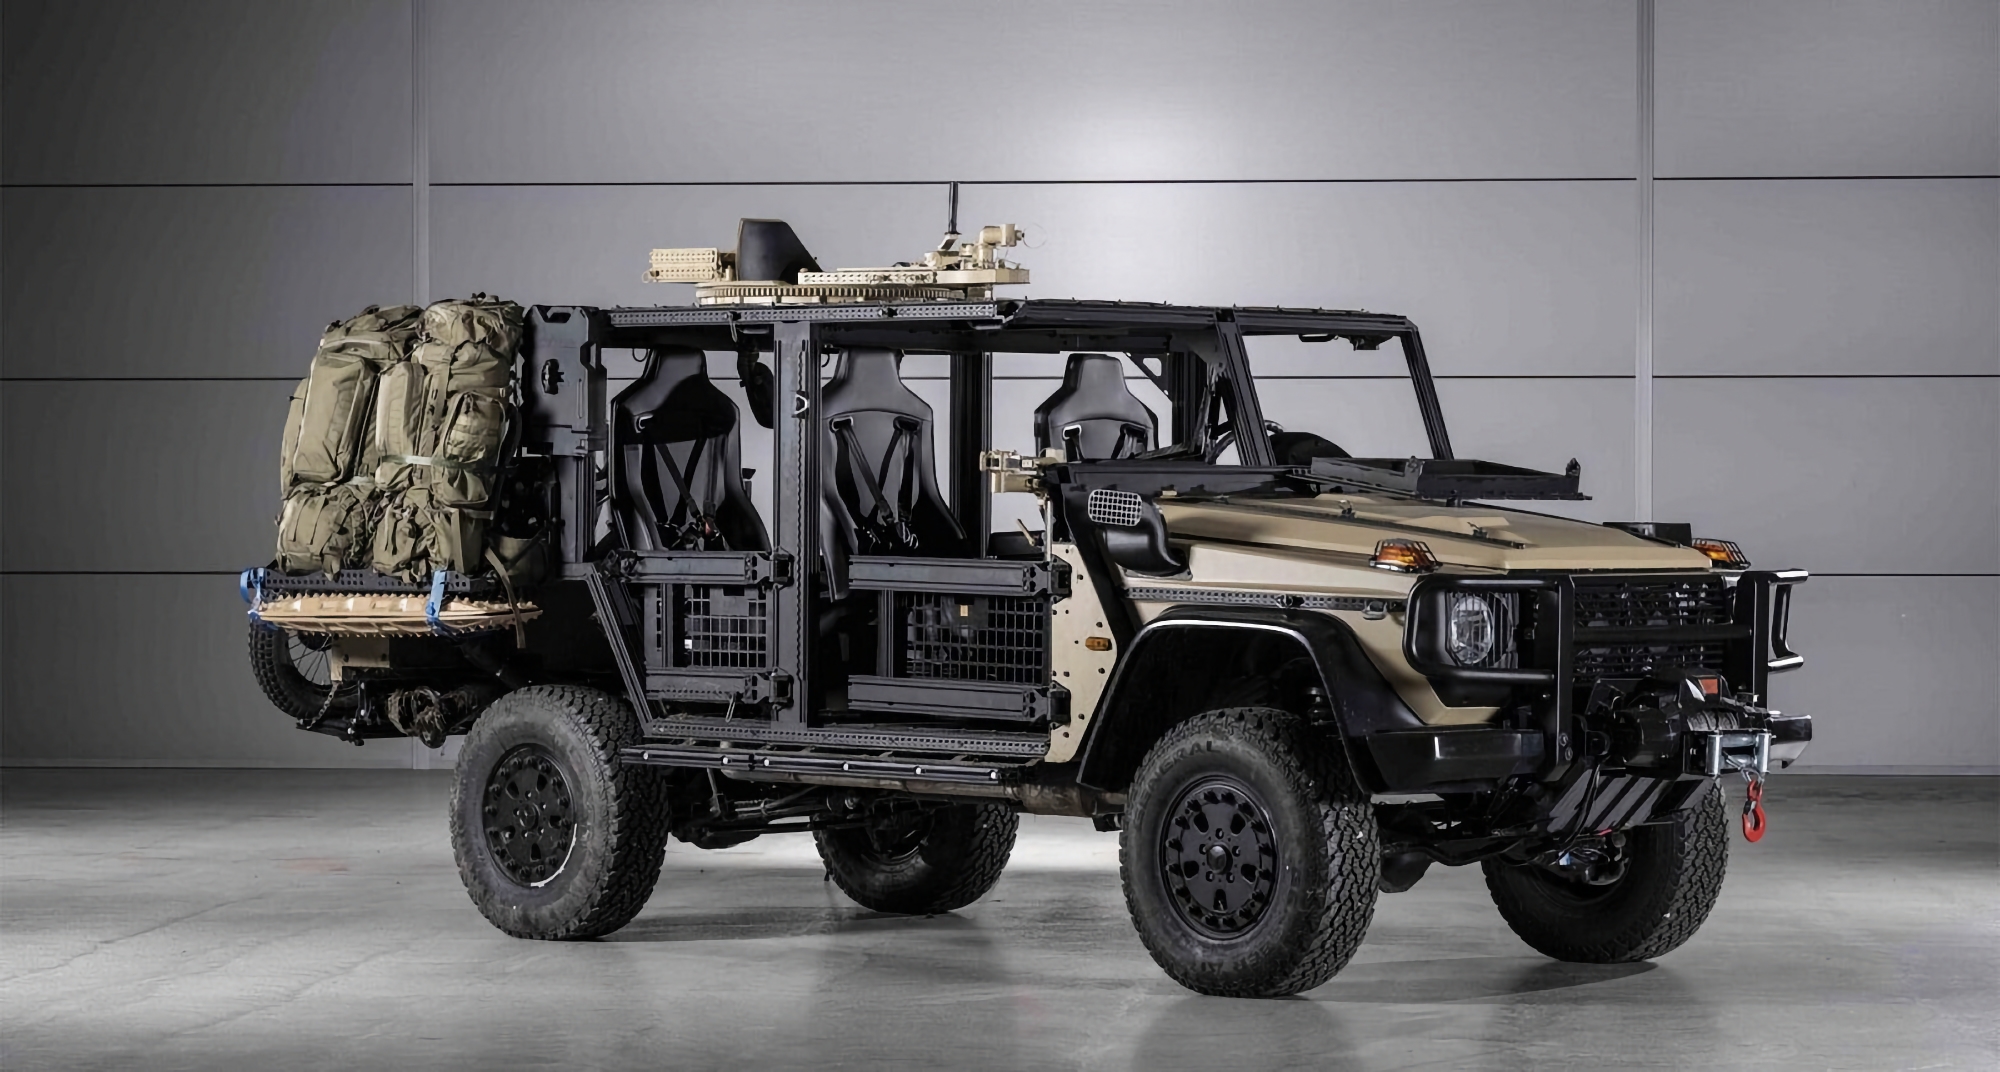 Ukraine will receive an additional batch of Caracal airborne tactical vehicles, which are based on Mercedes-Benz G-Classes